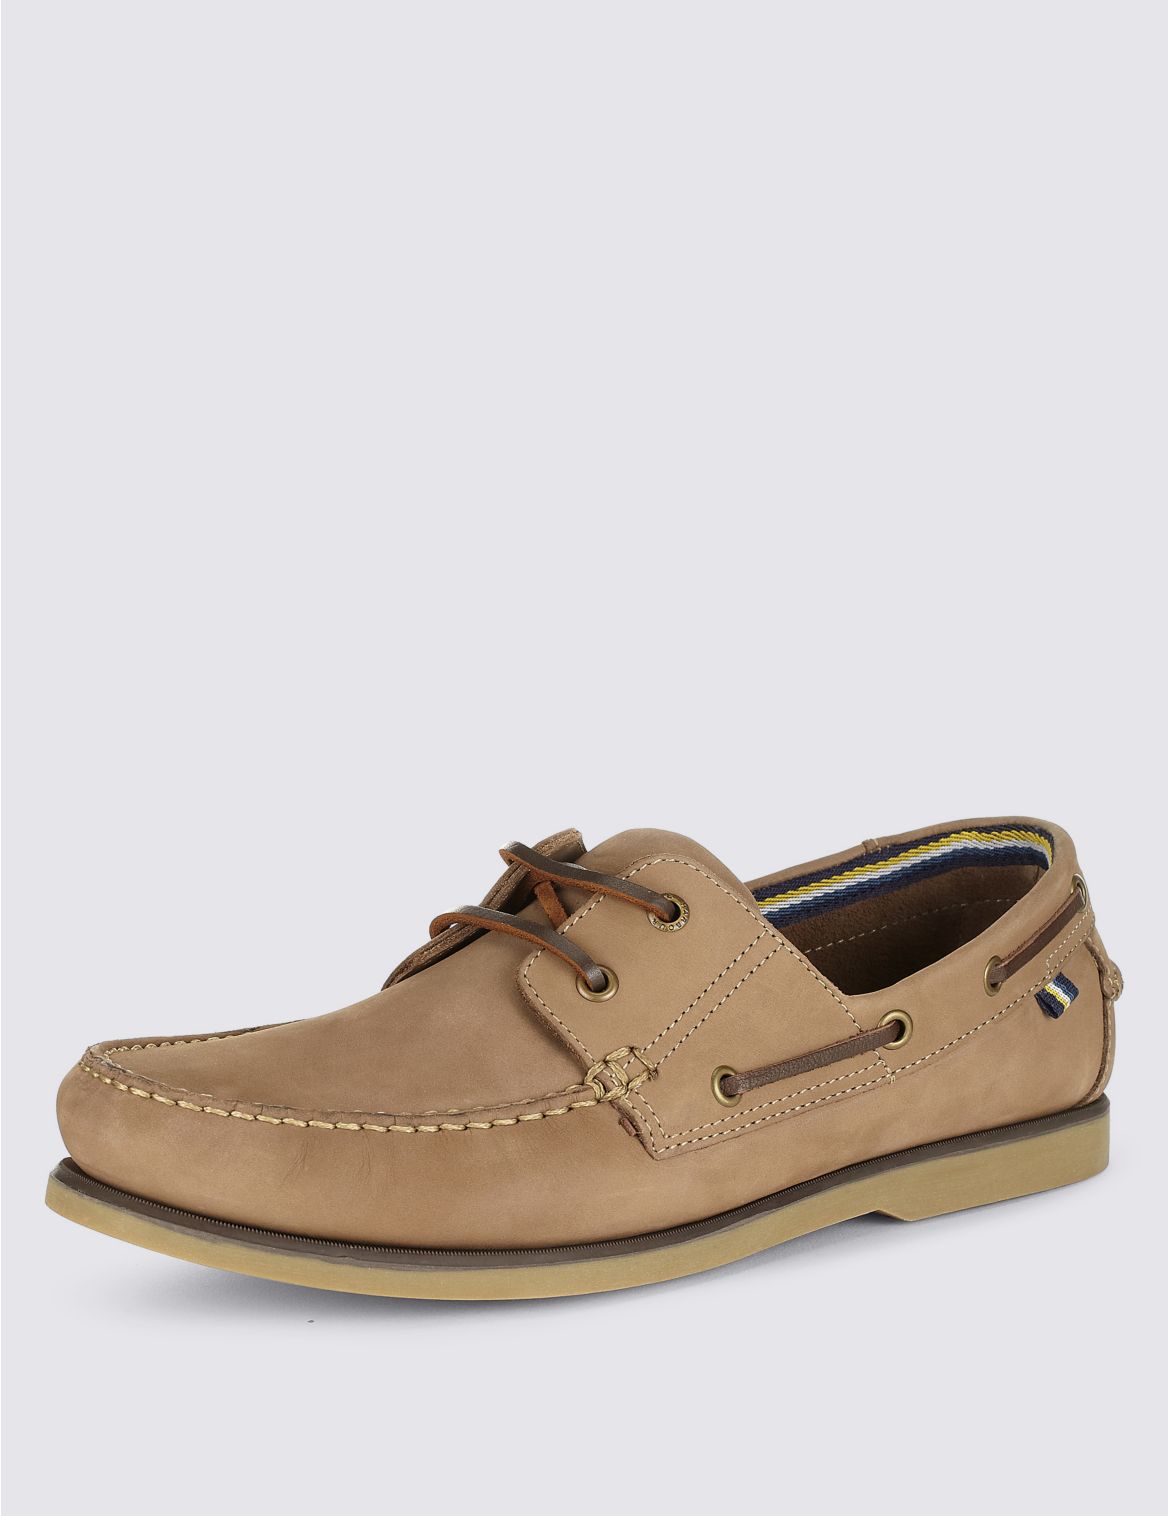 Leather Lace Up Boat Shoes Mushroom | Eizzy